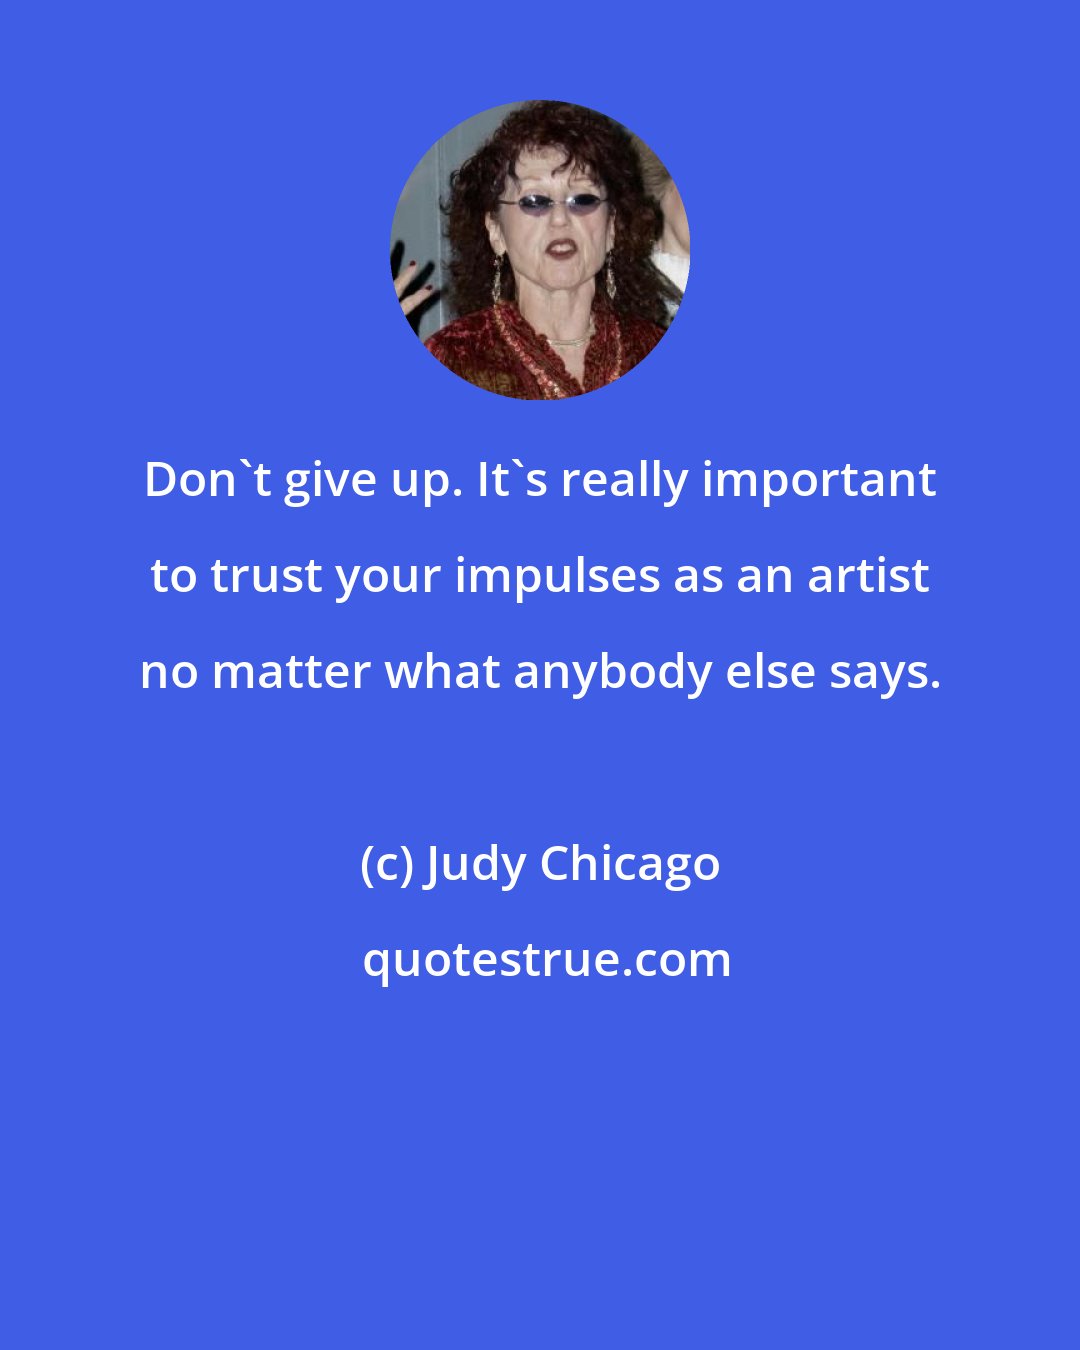 Judy Chicago: Don't give up. It's really important to trust your impulses as an artist no matter what anybody else says.